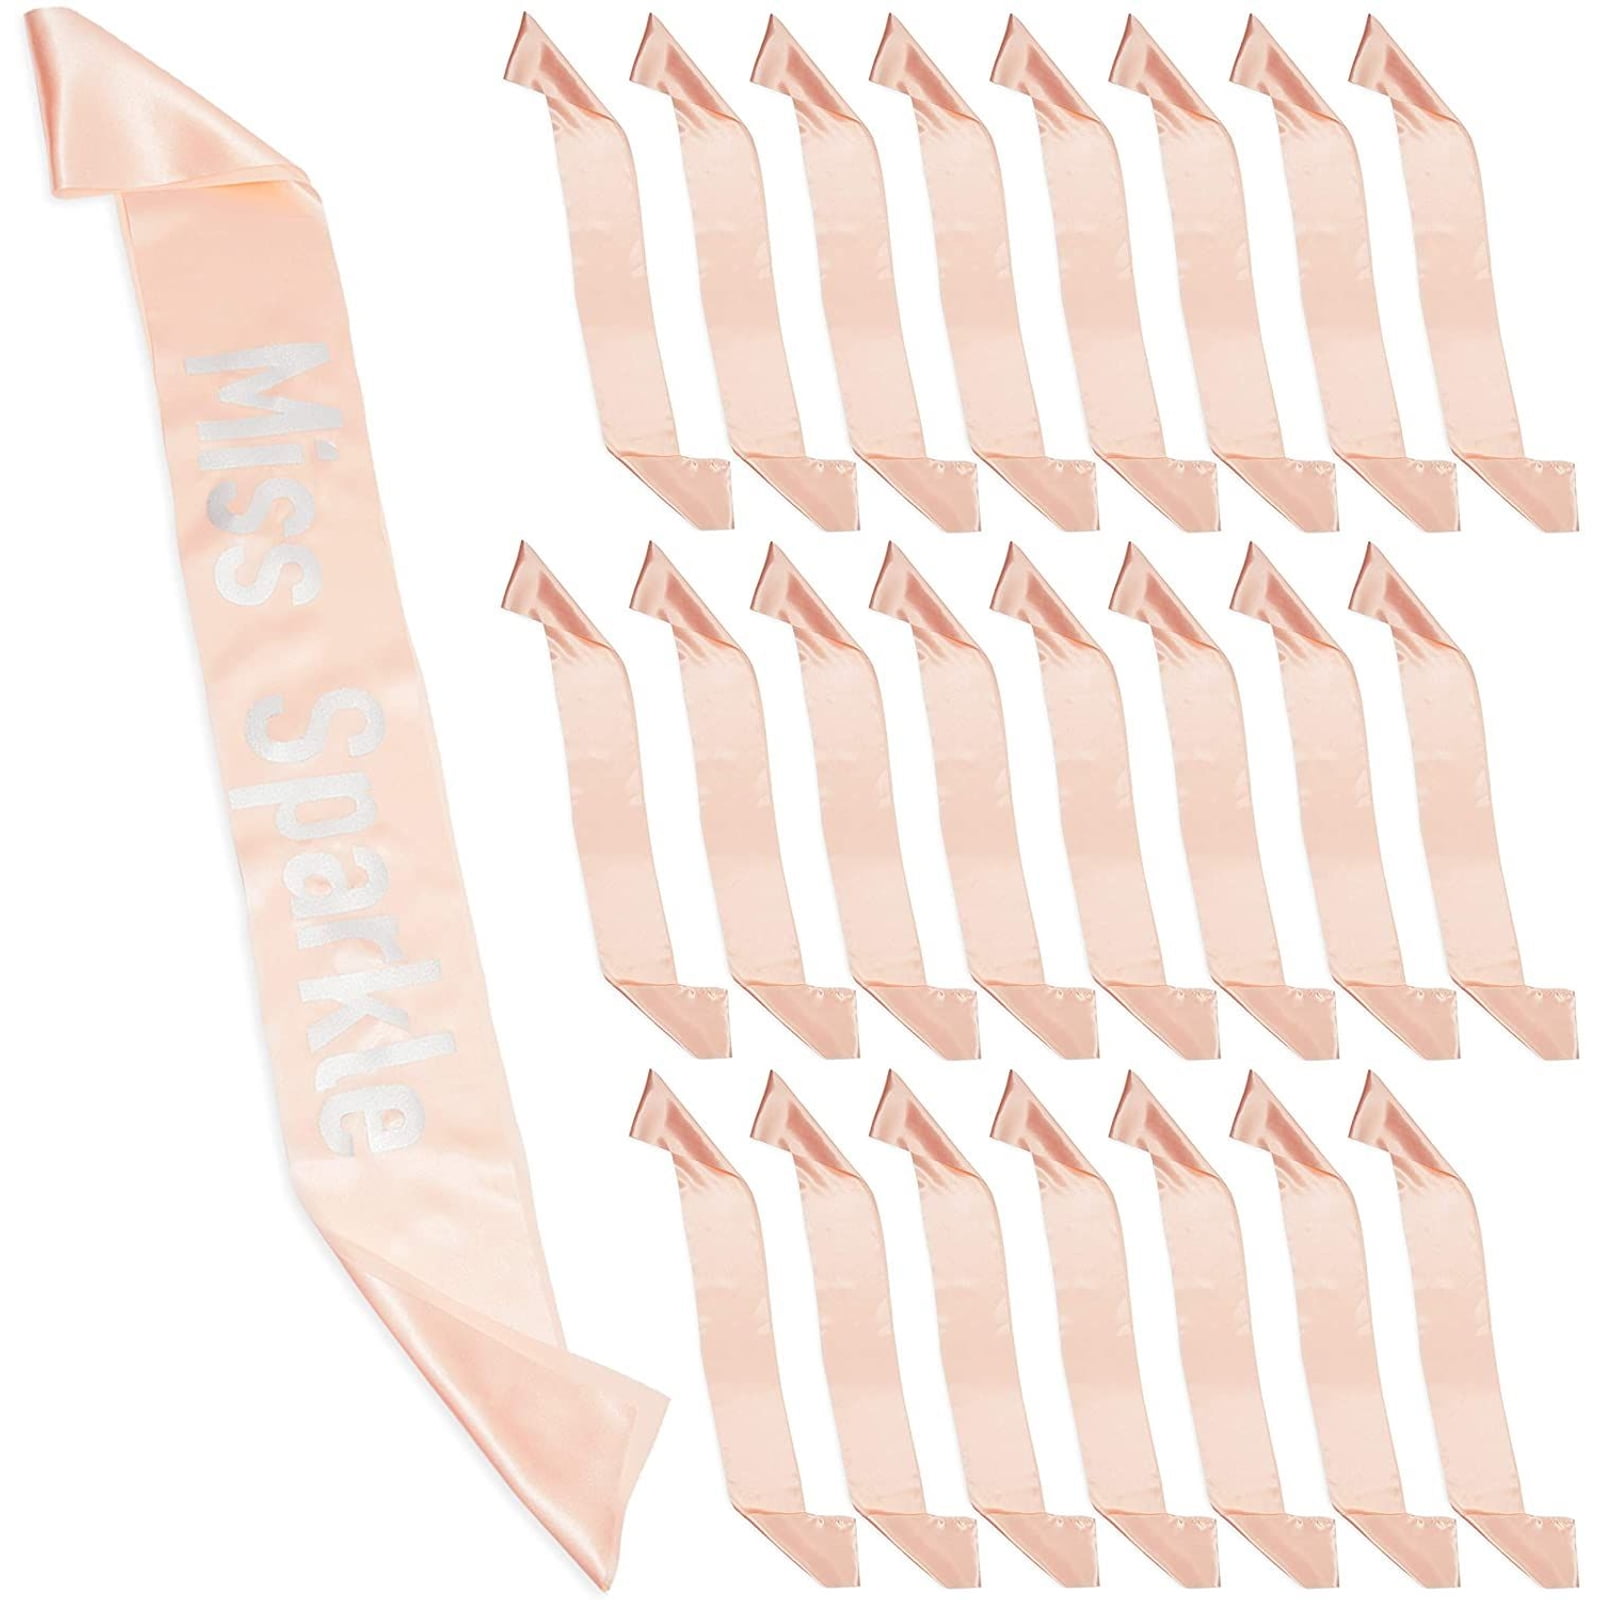 1Pc Blank Satin Sash Personalised Birthday Party Favors Wedding Baby Shower Prom 